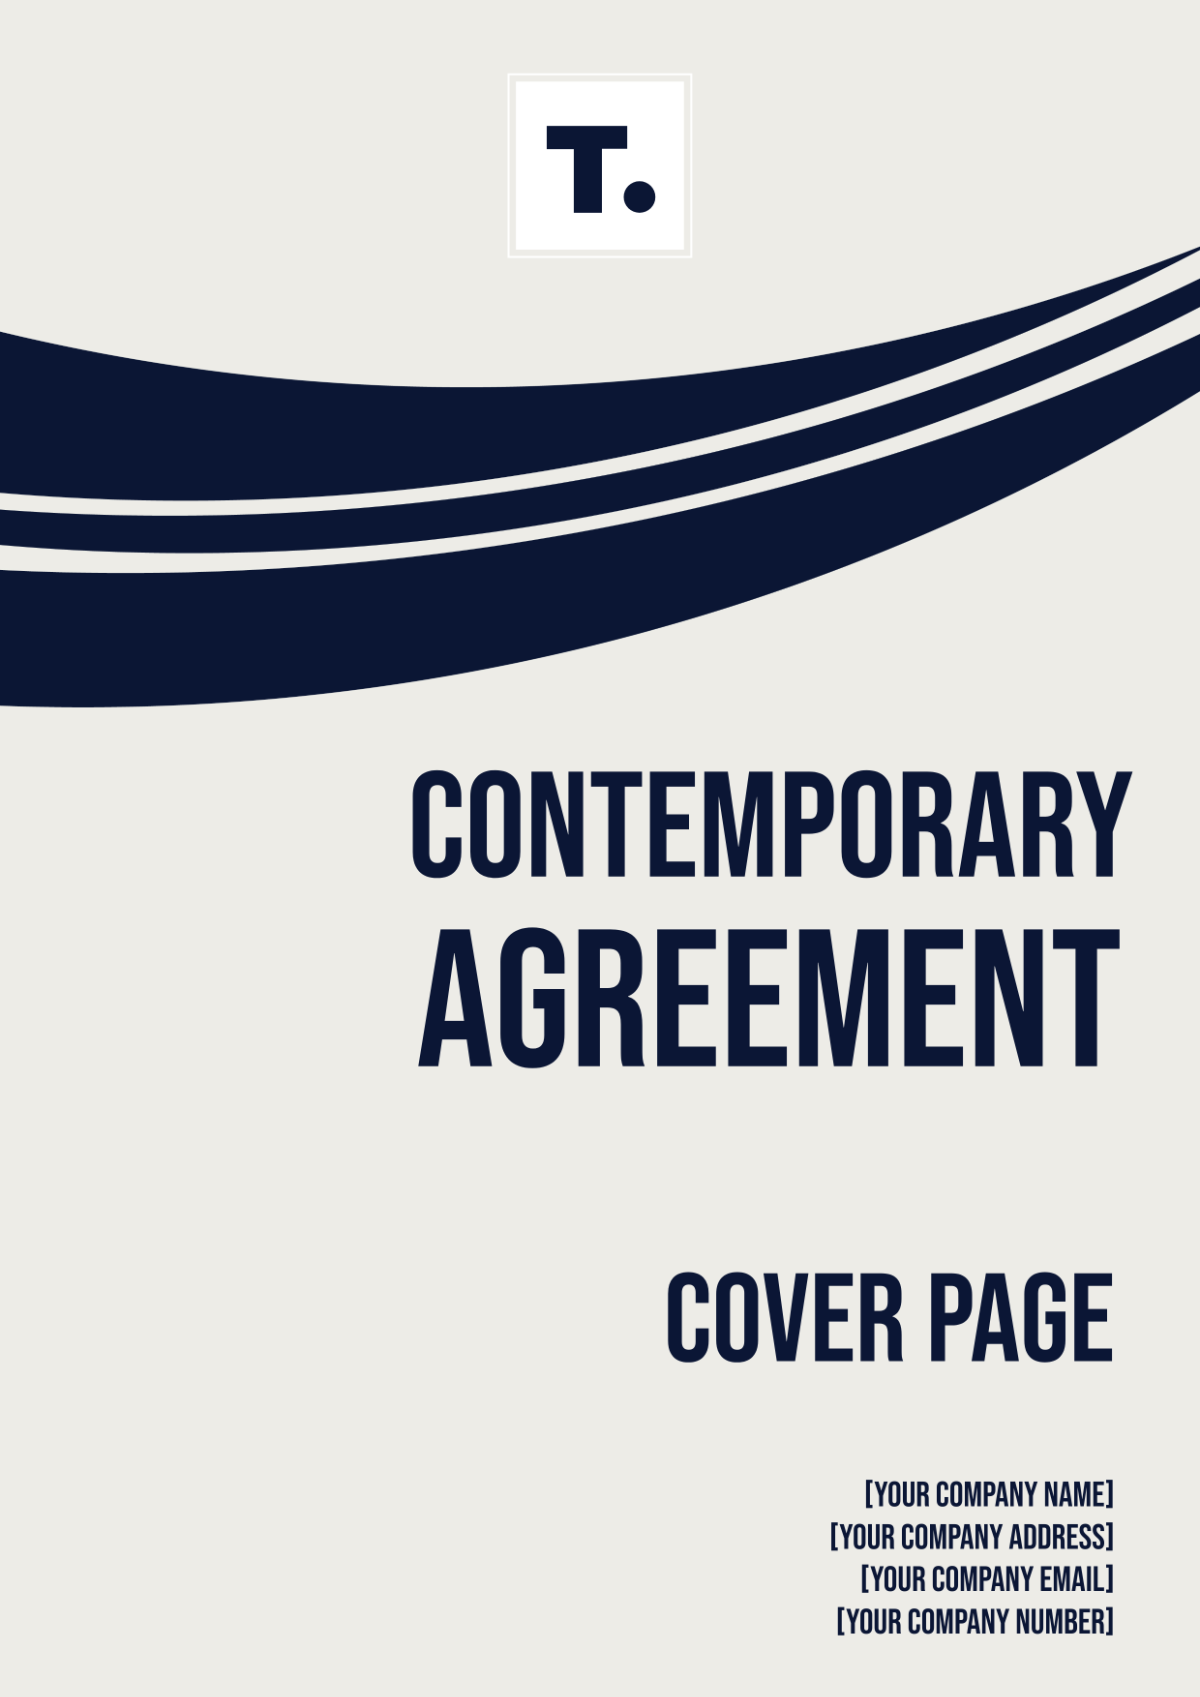 Contemporary Agreement Cover Page